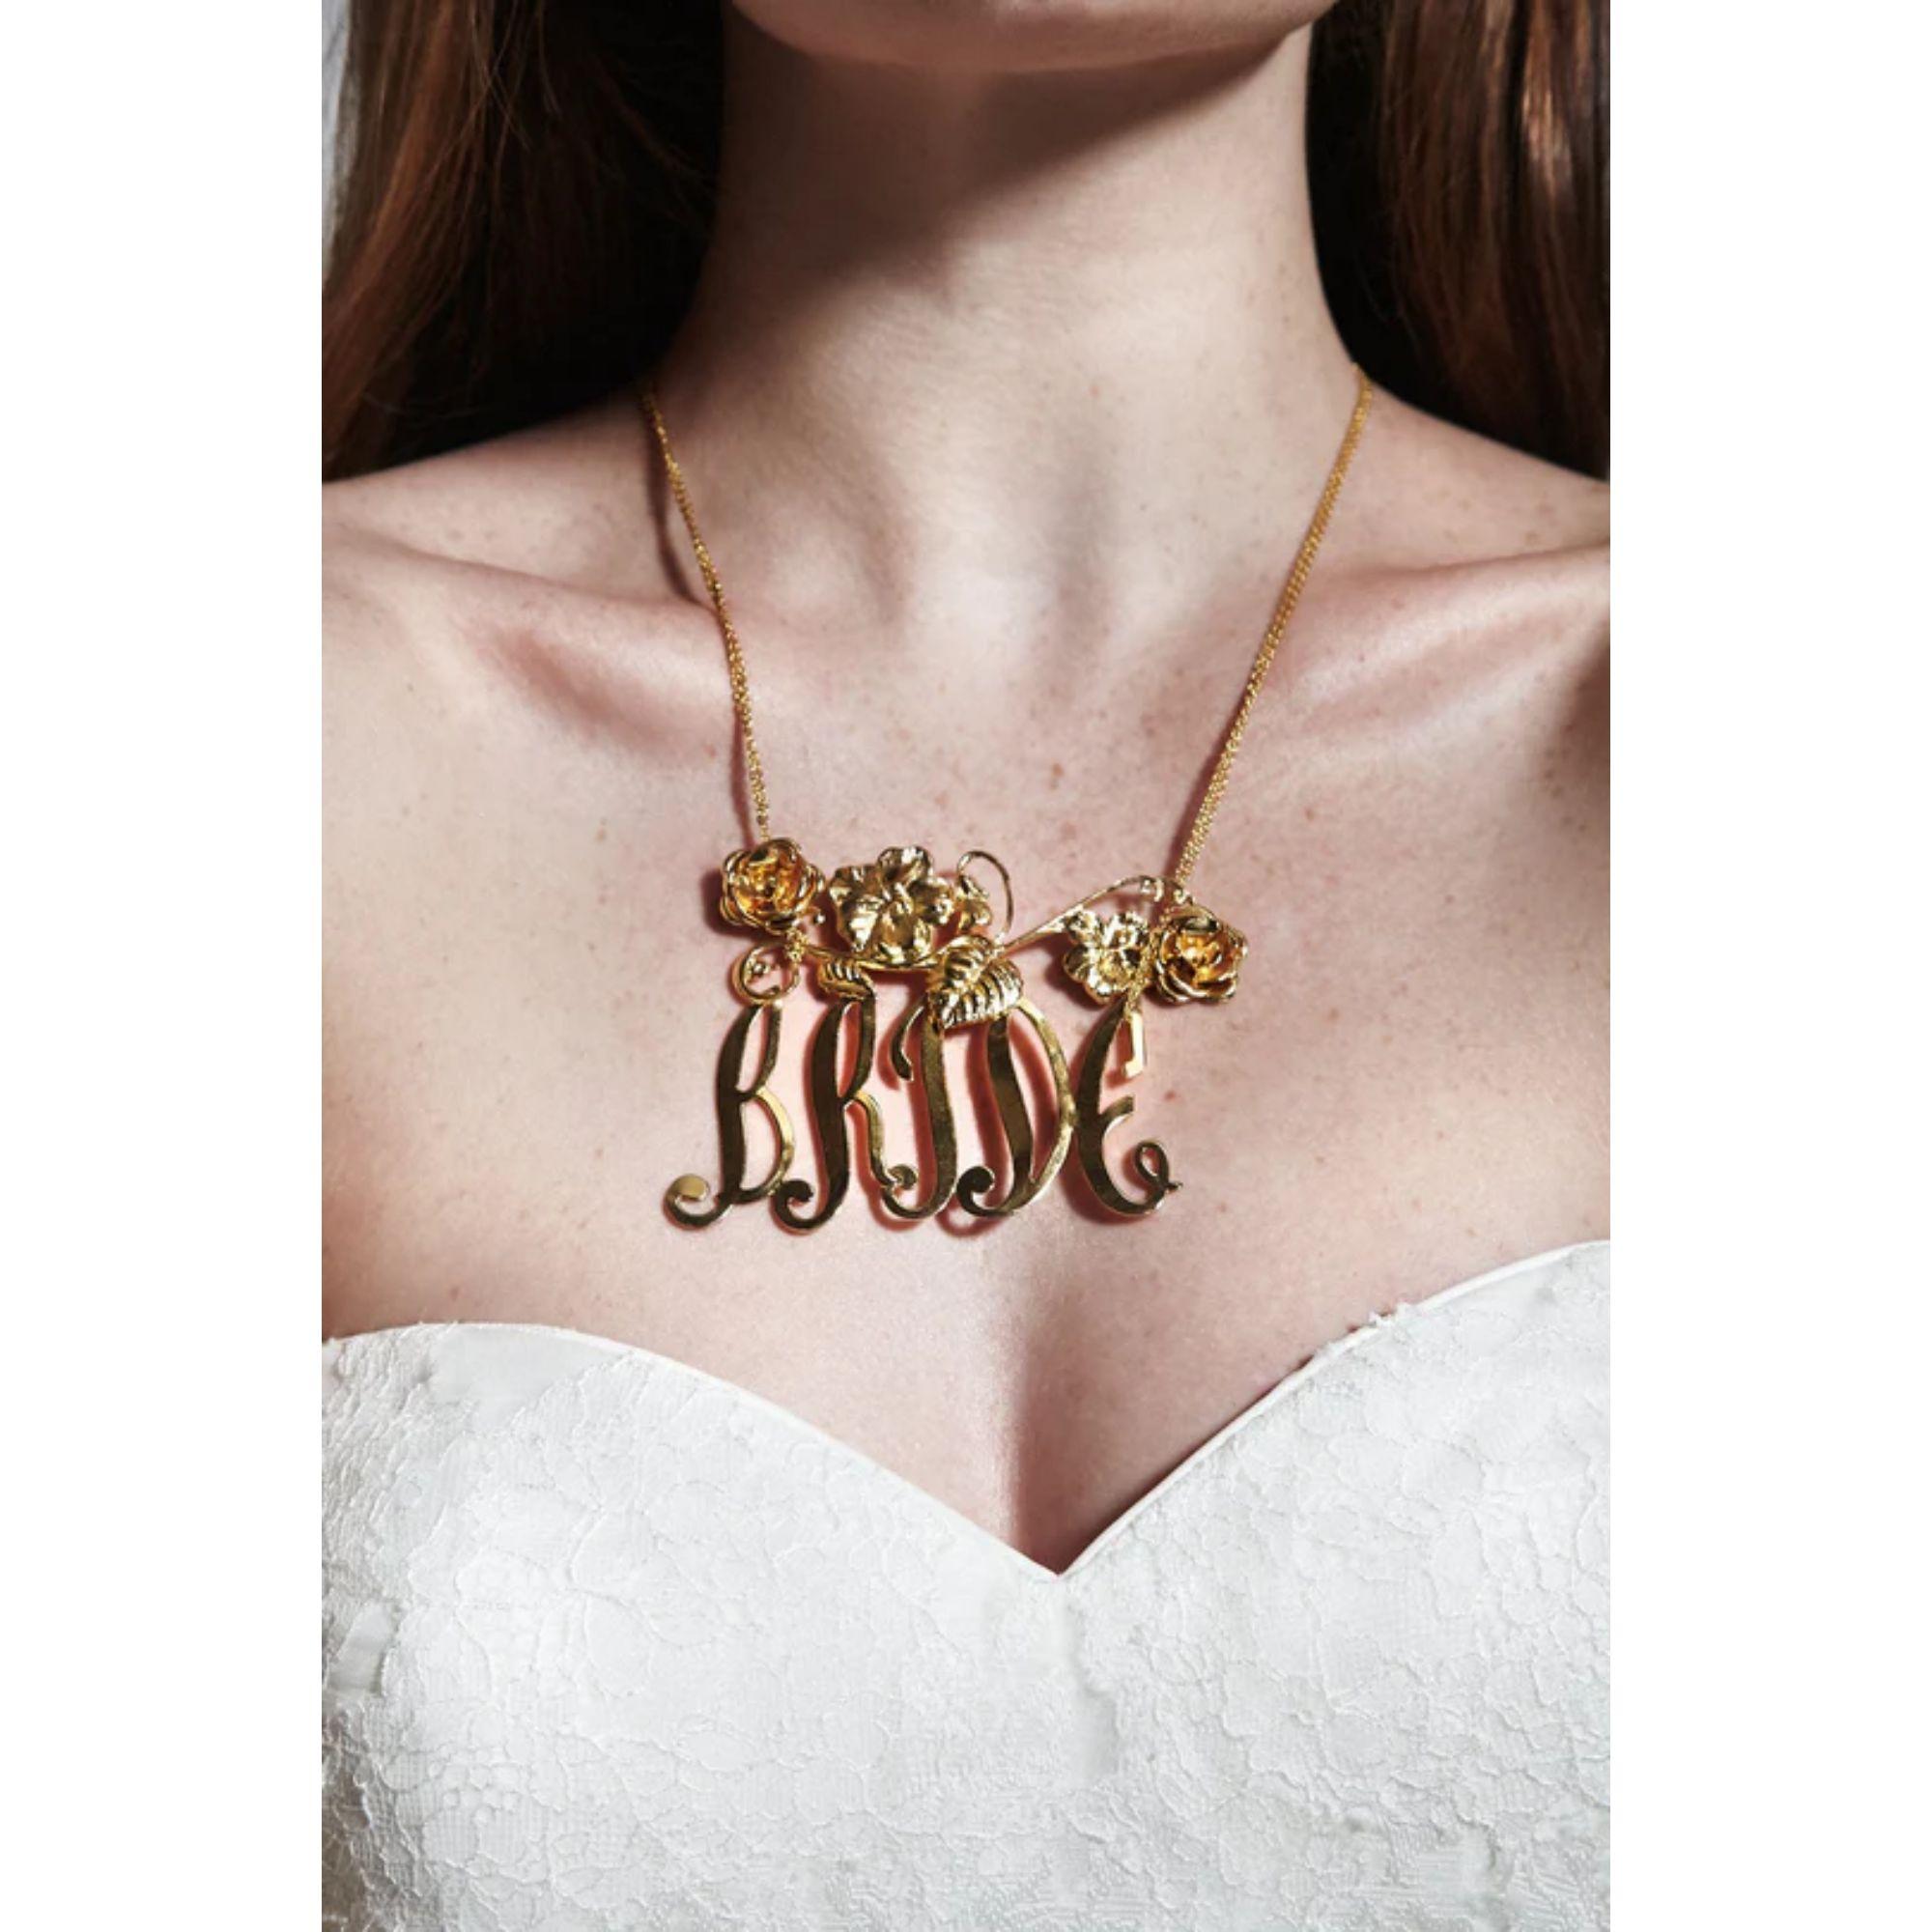 Opulent baroque Bride necklace to keep it royal and fabulous! Perfect for the Bride and Groom who want to keep their event luxurious and unique. Handmade in LA of 24k plated brass this name plate necklace is a new twist on a classic